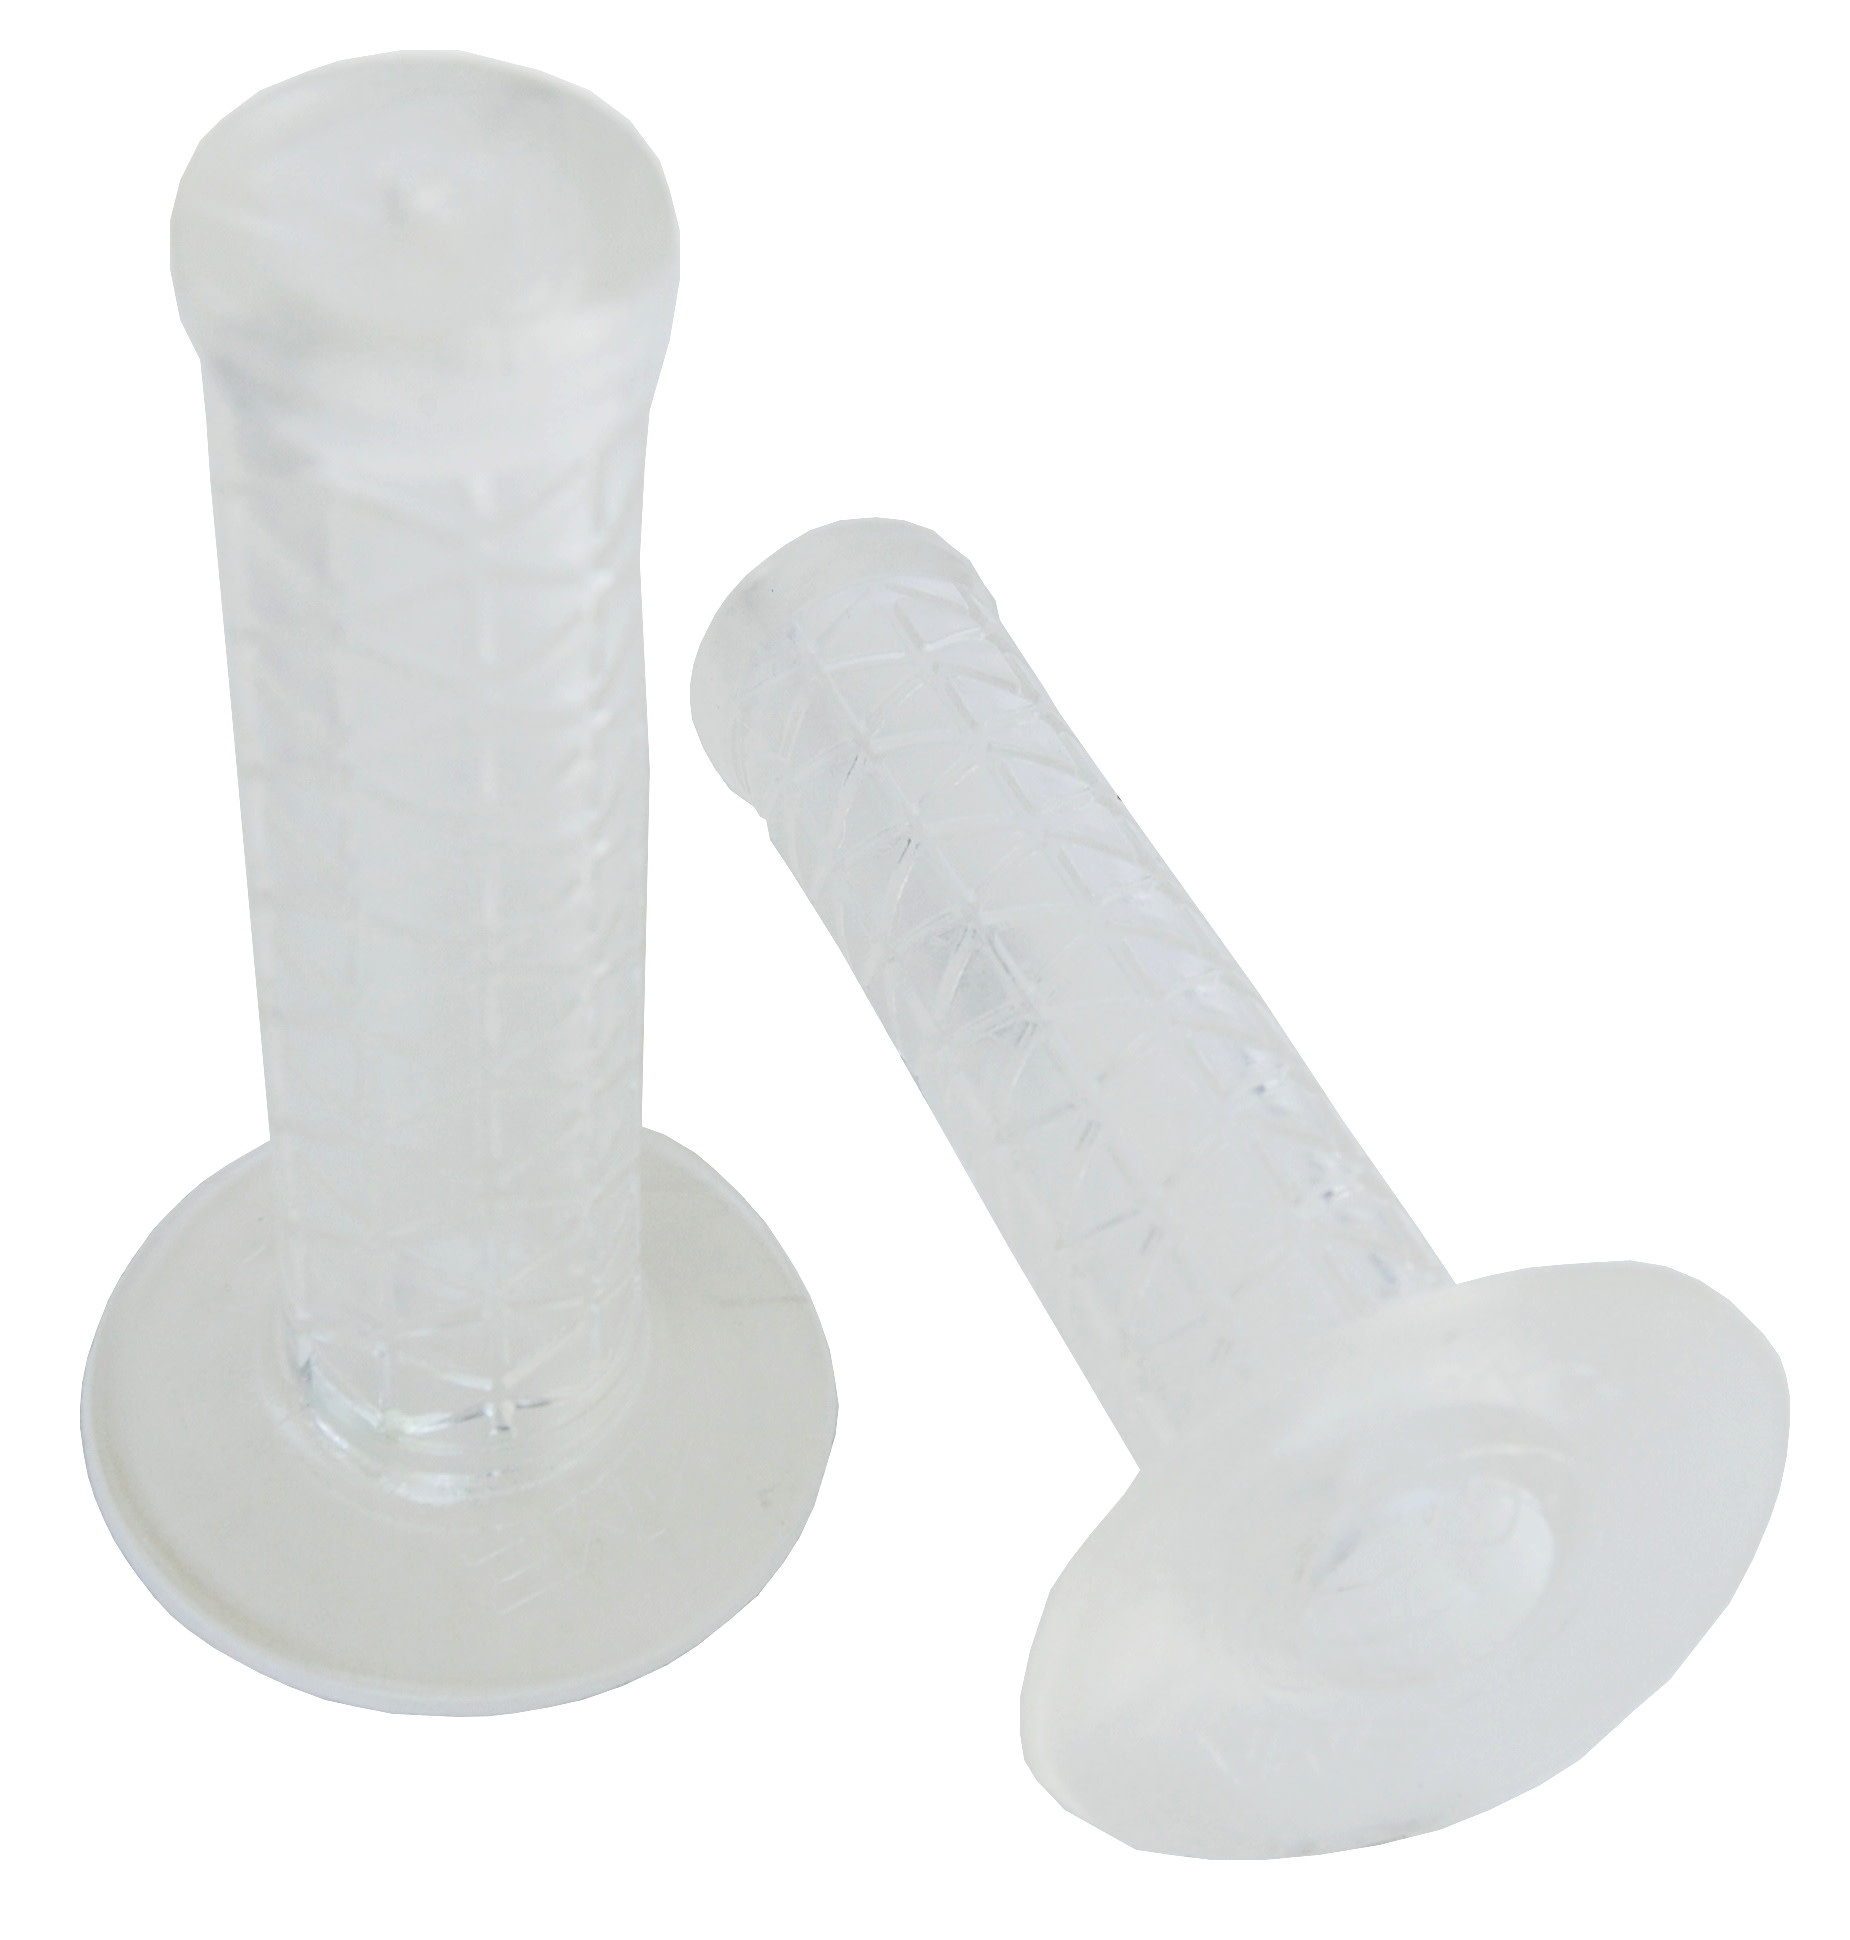 AME old school BMX bicycle grips - TRI - CLEAR